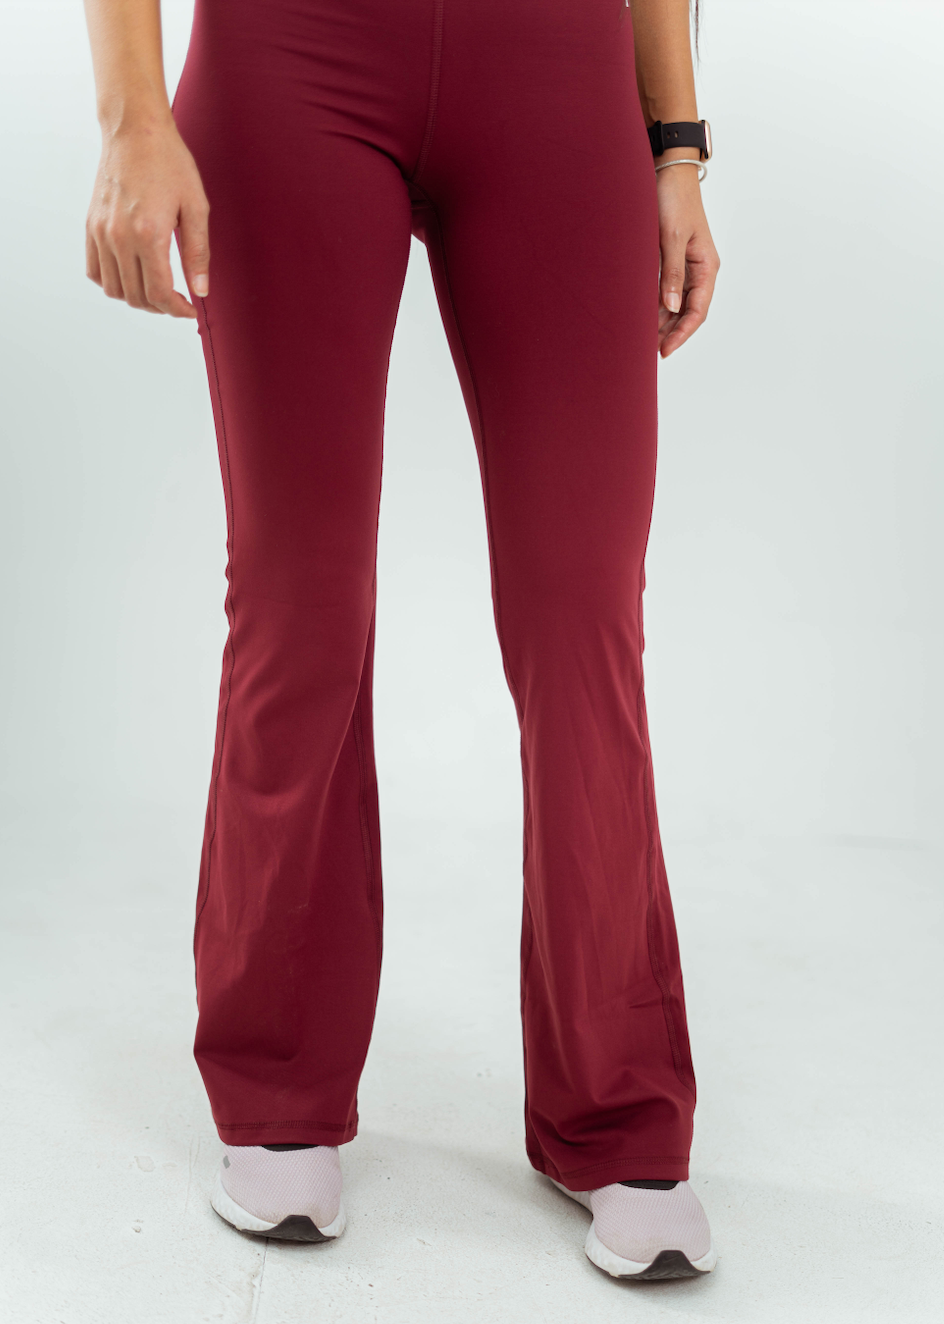 ULTRA SOFT PREMIUM FLARED PANTS - Merlot Red - FIT TRIBE